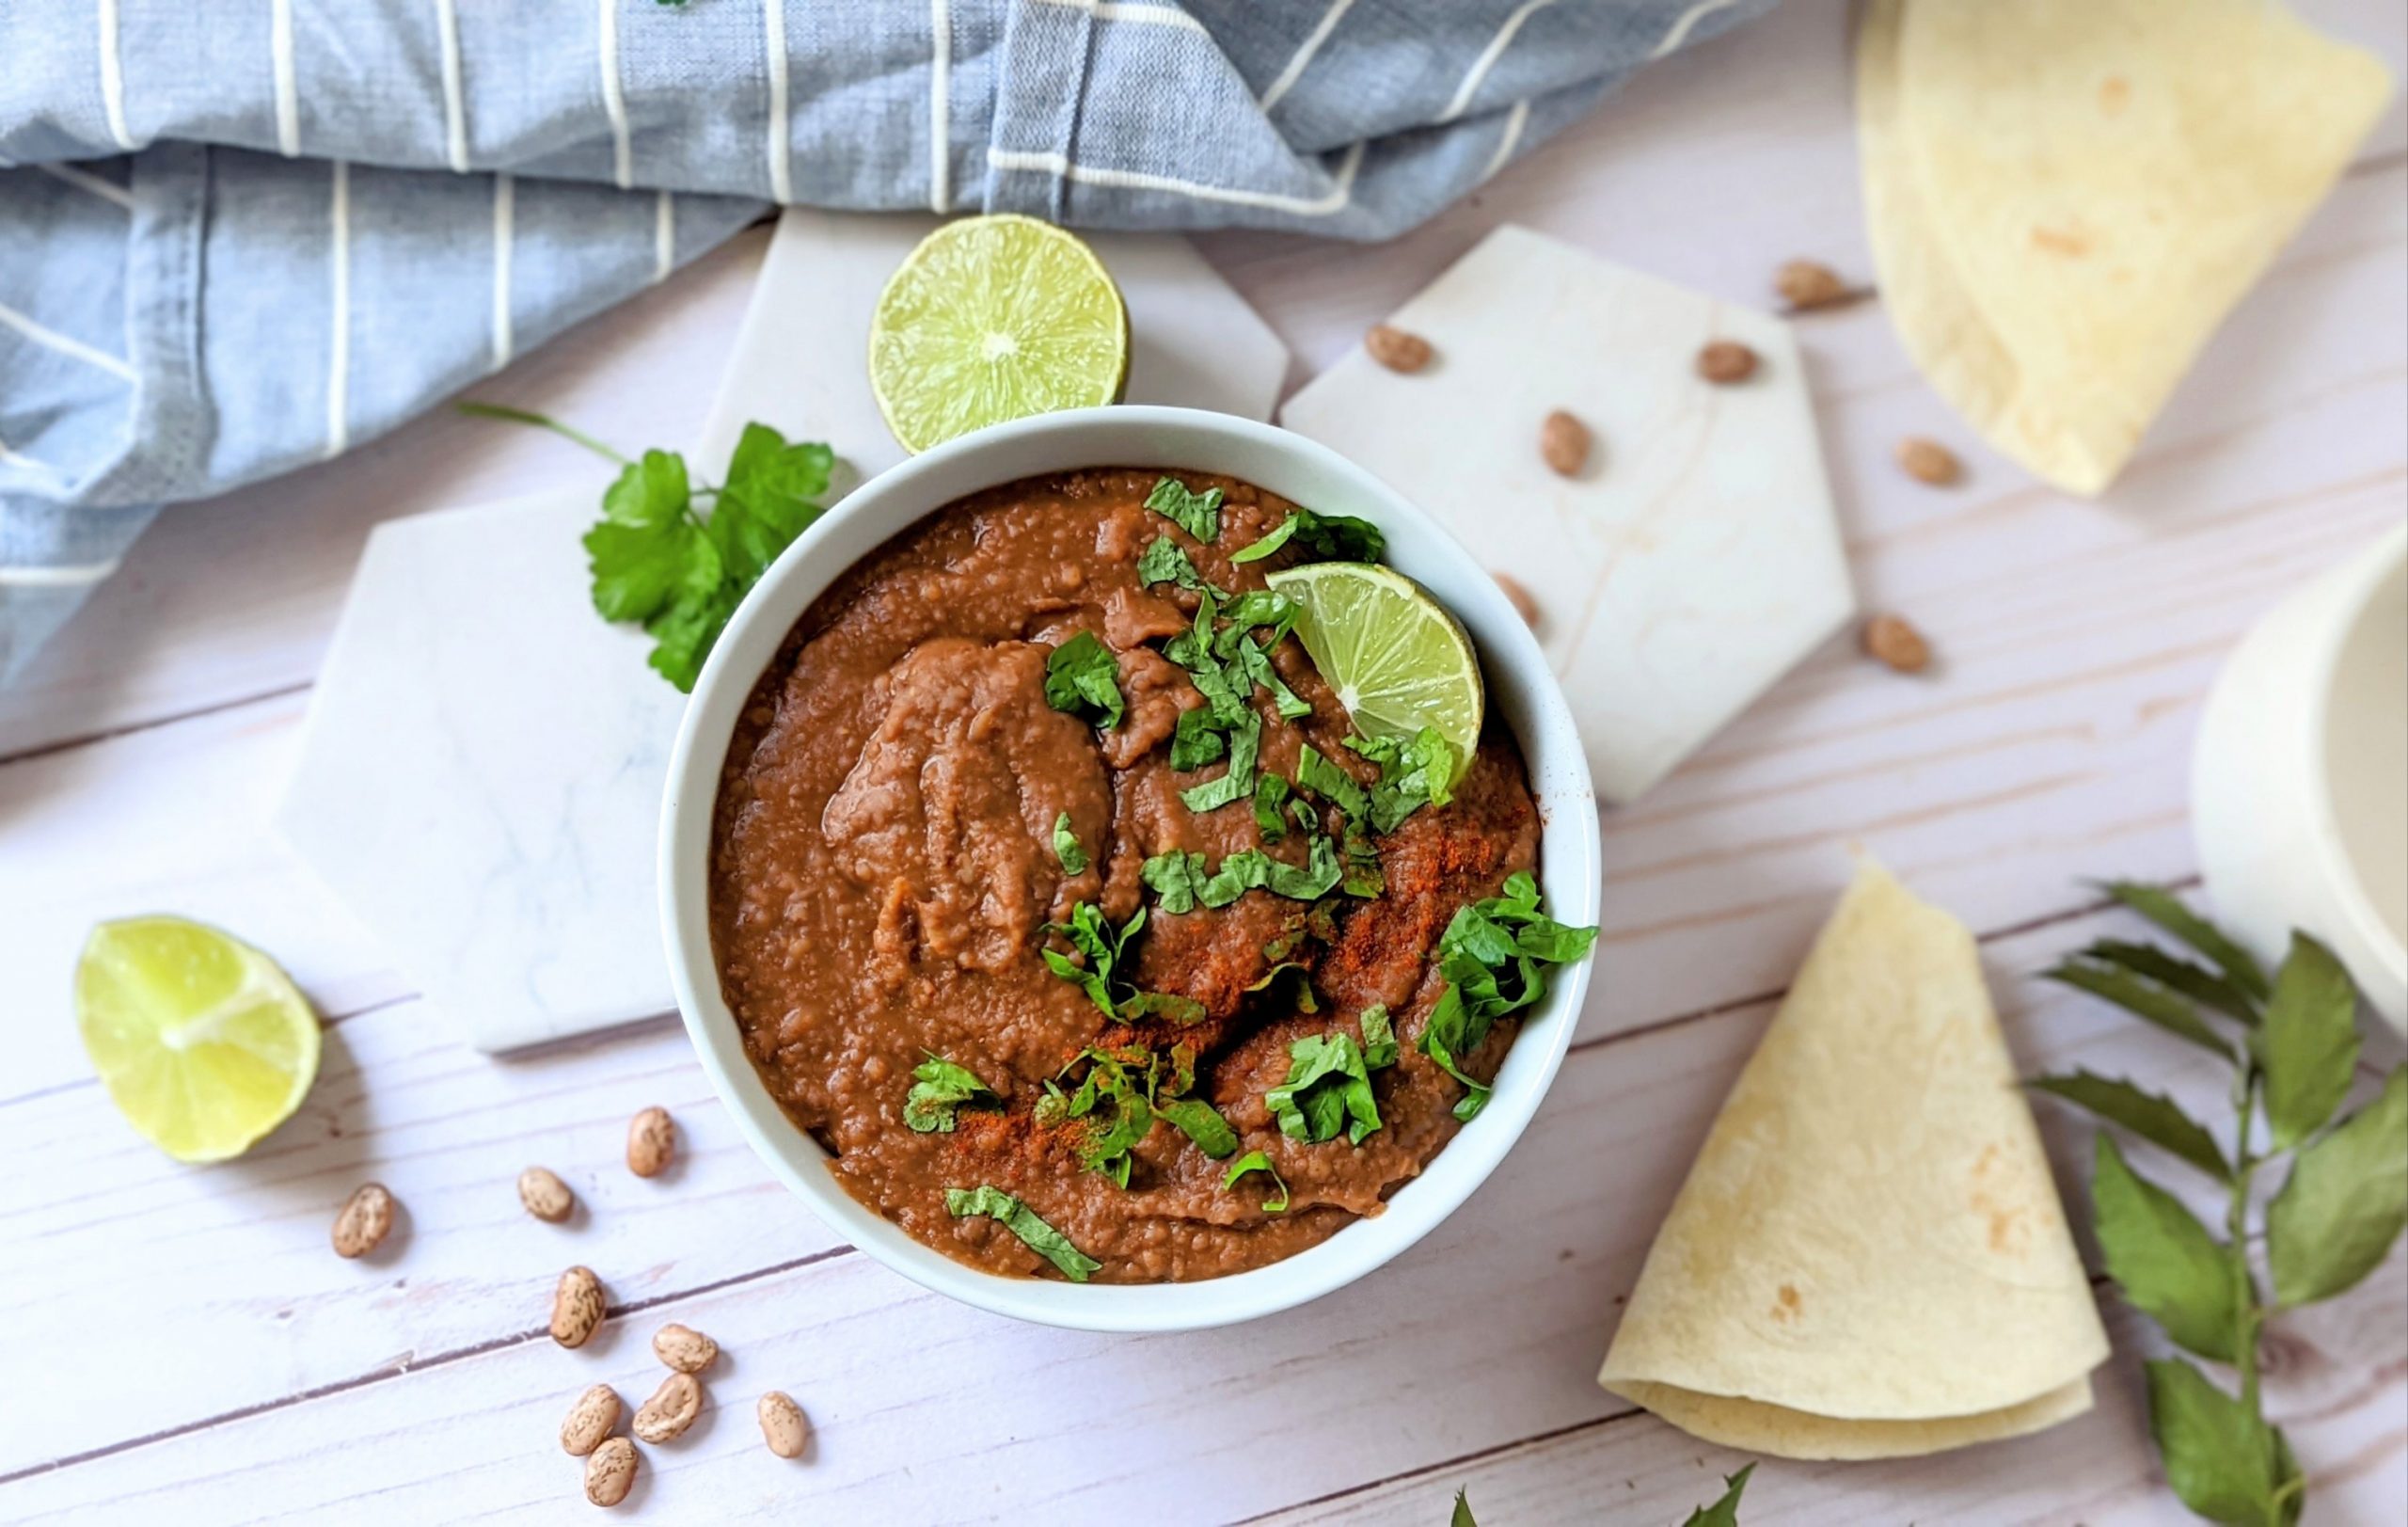 can refried beans recipe healthy gluten free vegan vegetarian refried beans no oil or salt added healthy beans for high blood pressure